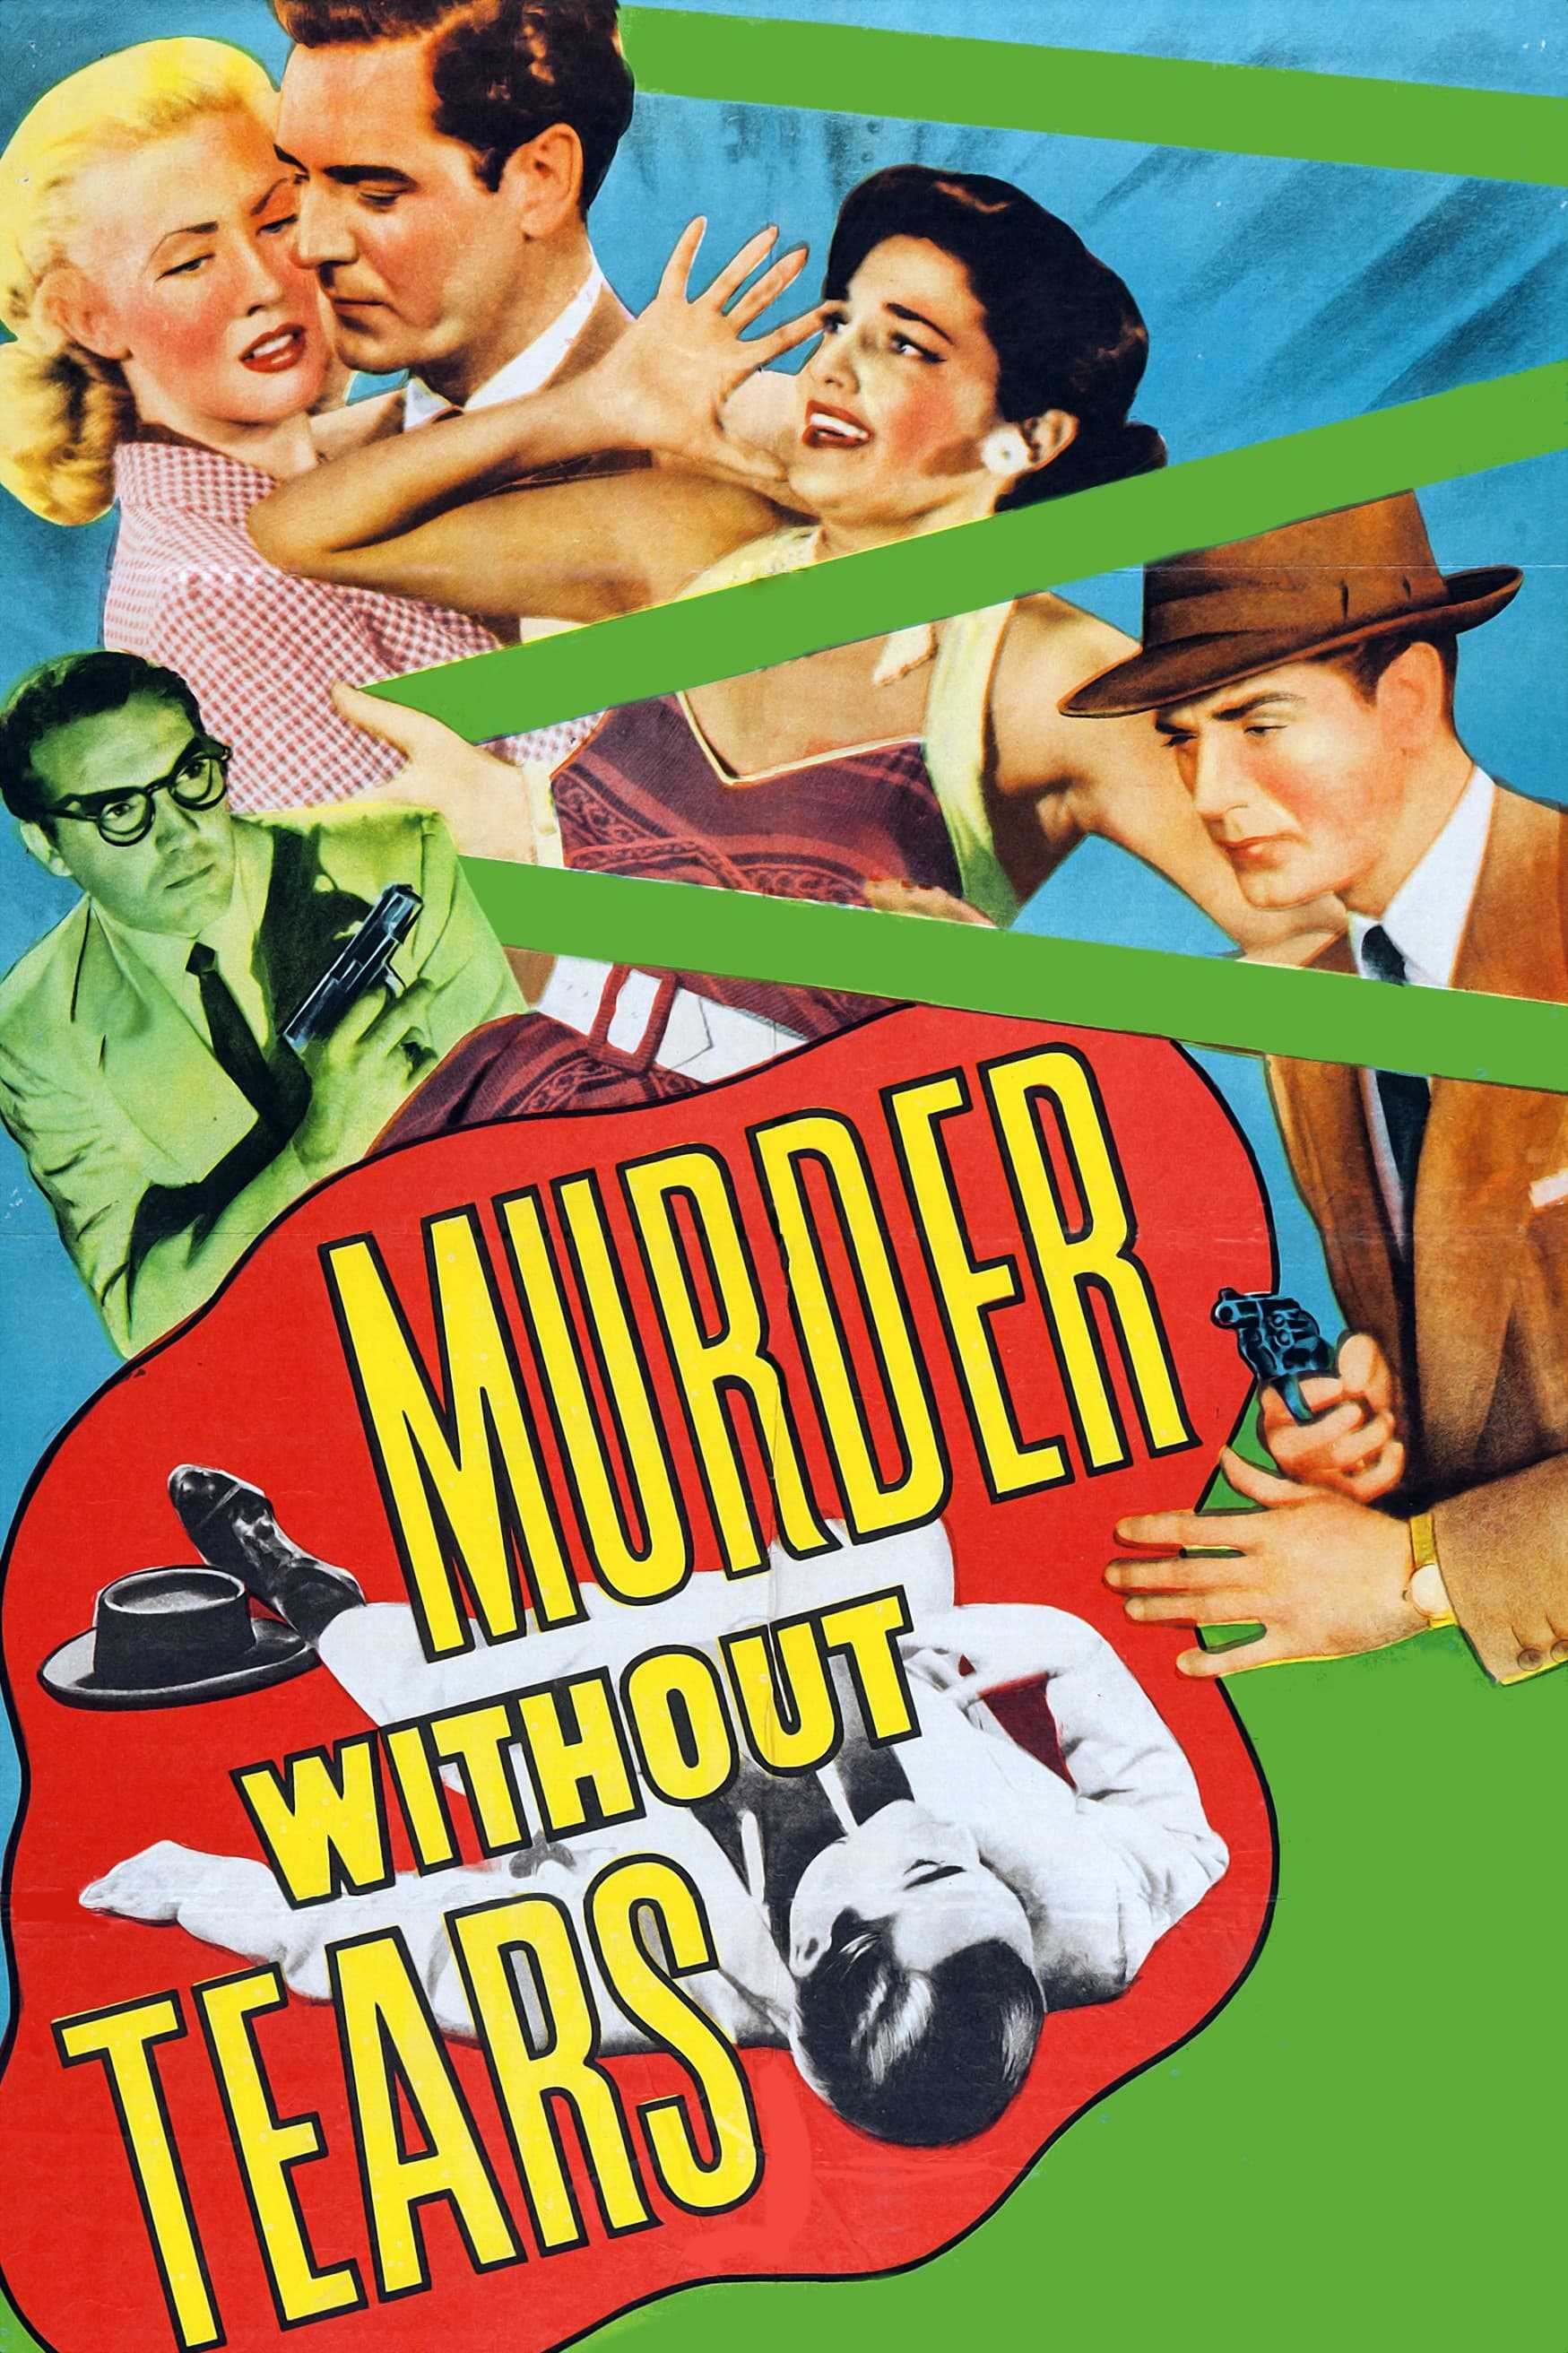 Murder Without Tears (1953)